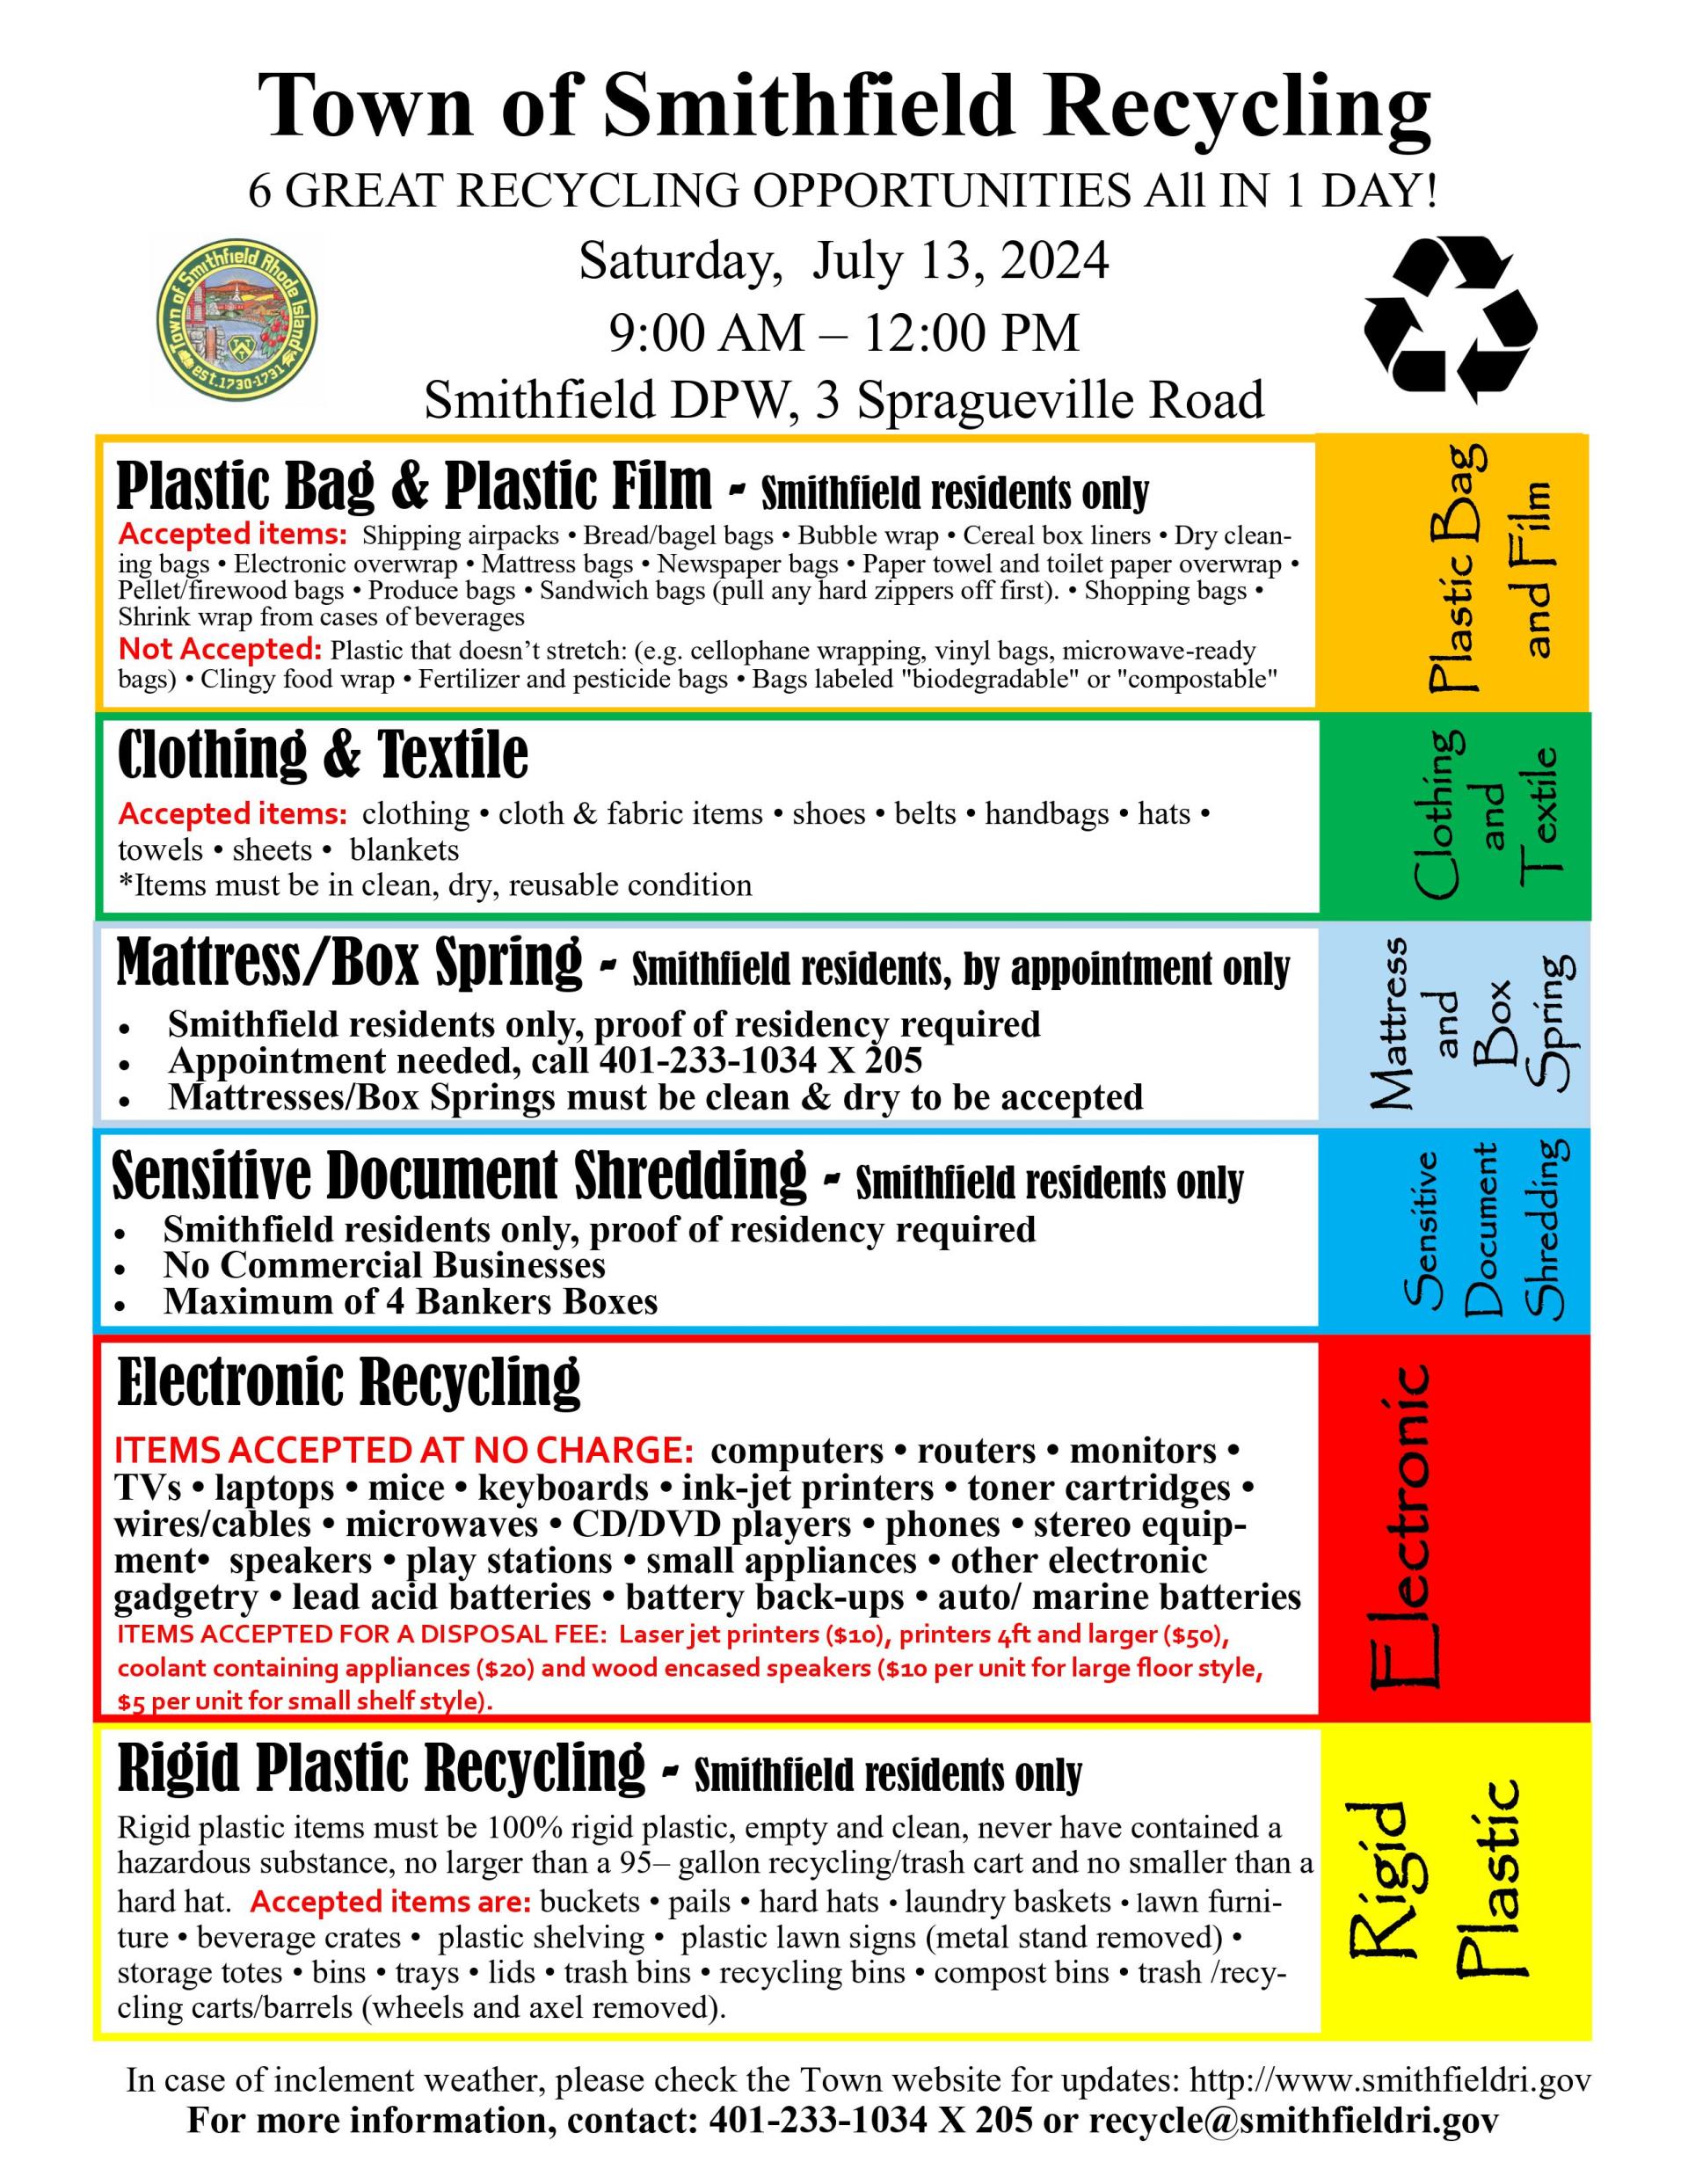 Recycling Event: Saturday, July 13, 2024